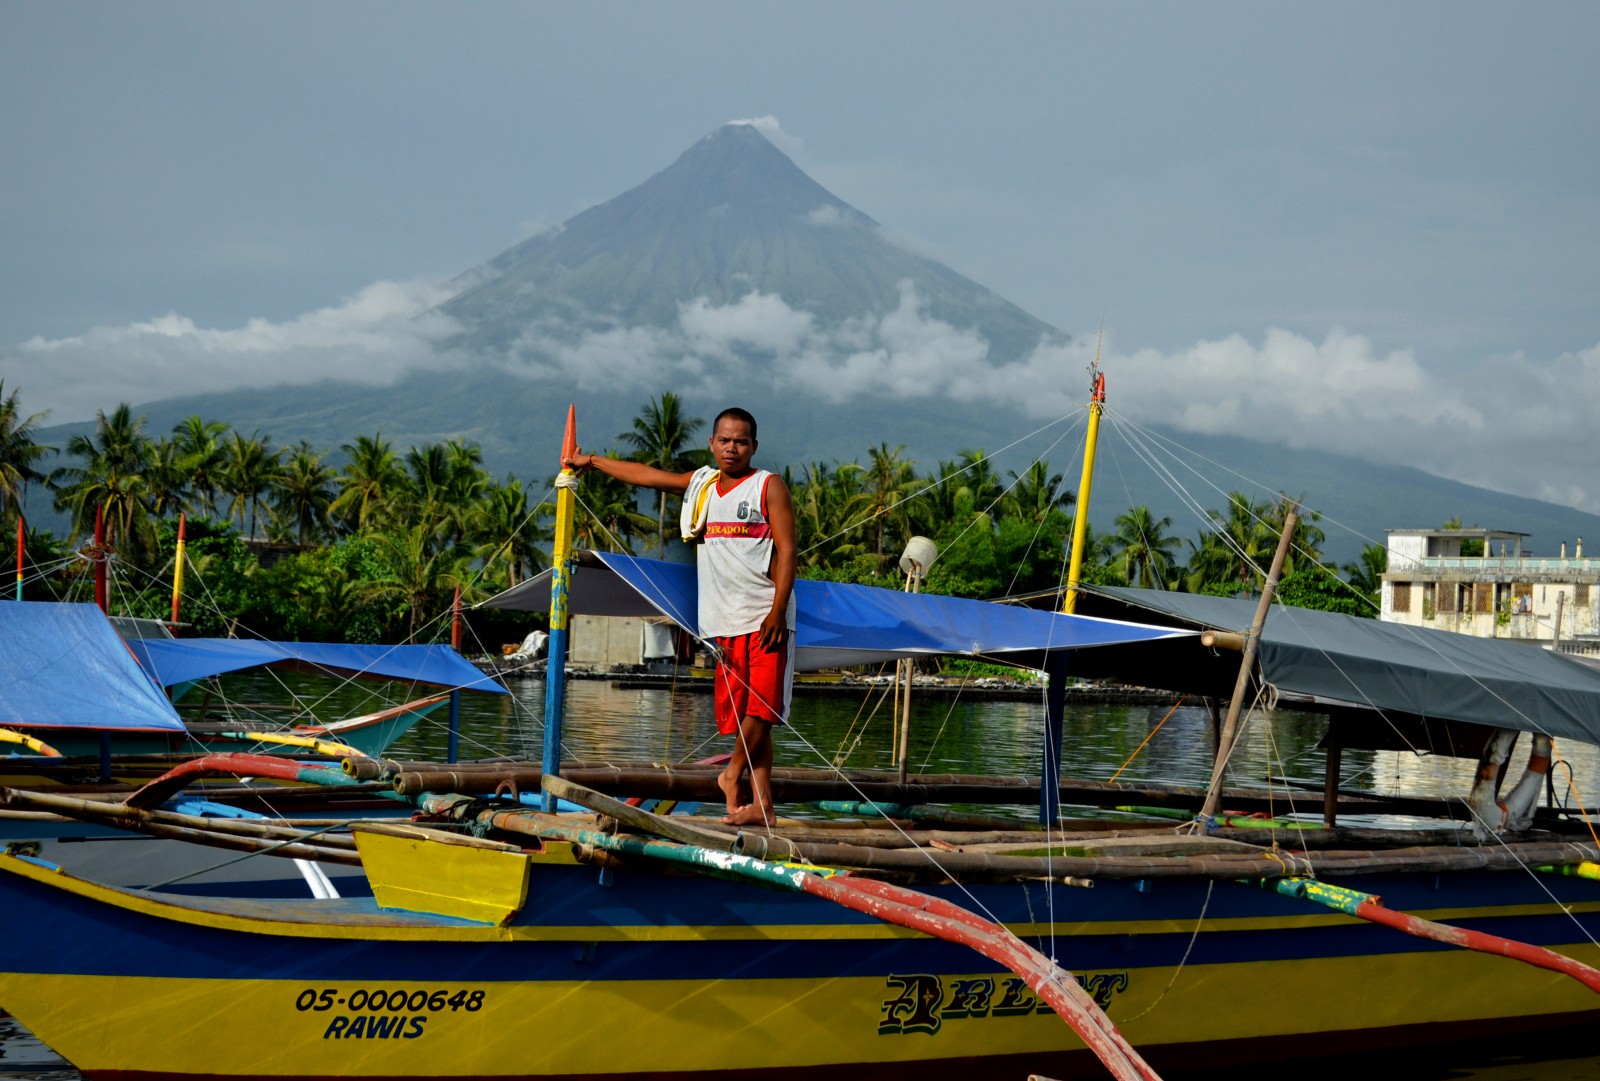 fishers-under-the-shadow-of-mayon-by-gregg-yan-wwf.jpg